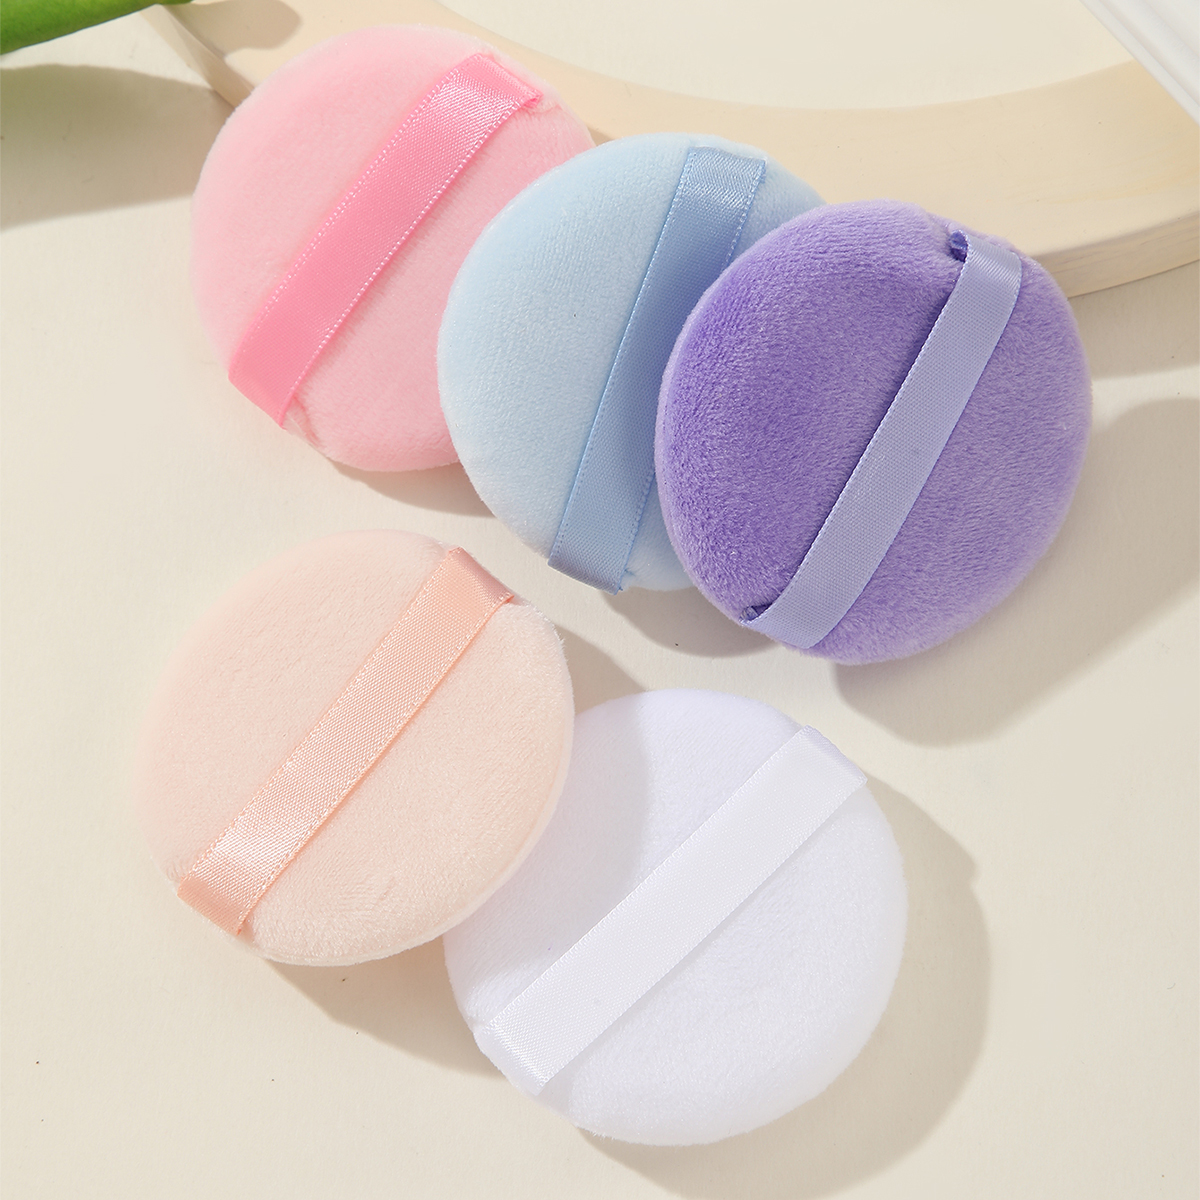 5-Color Mixed Round Powder Puff Makeup Puff